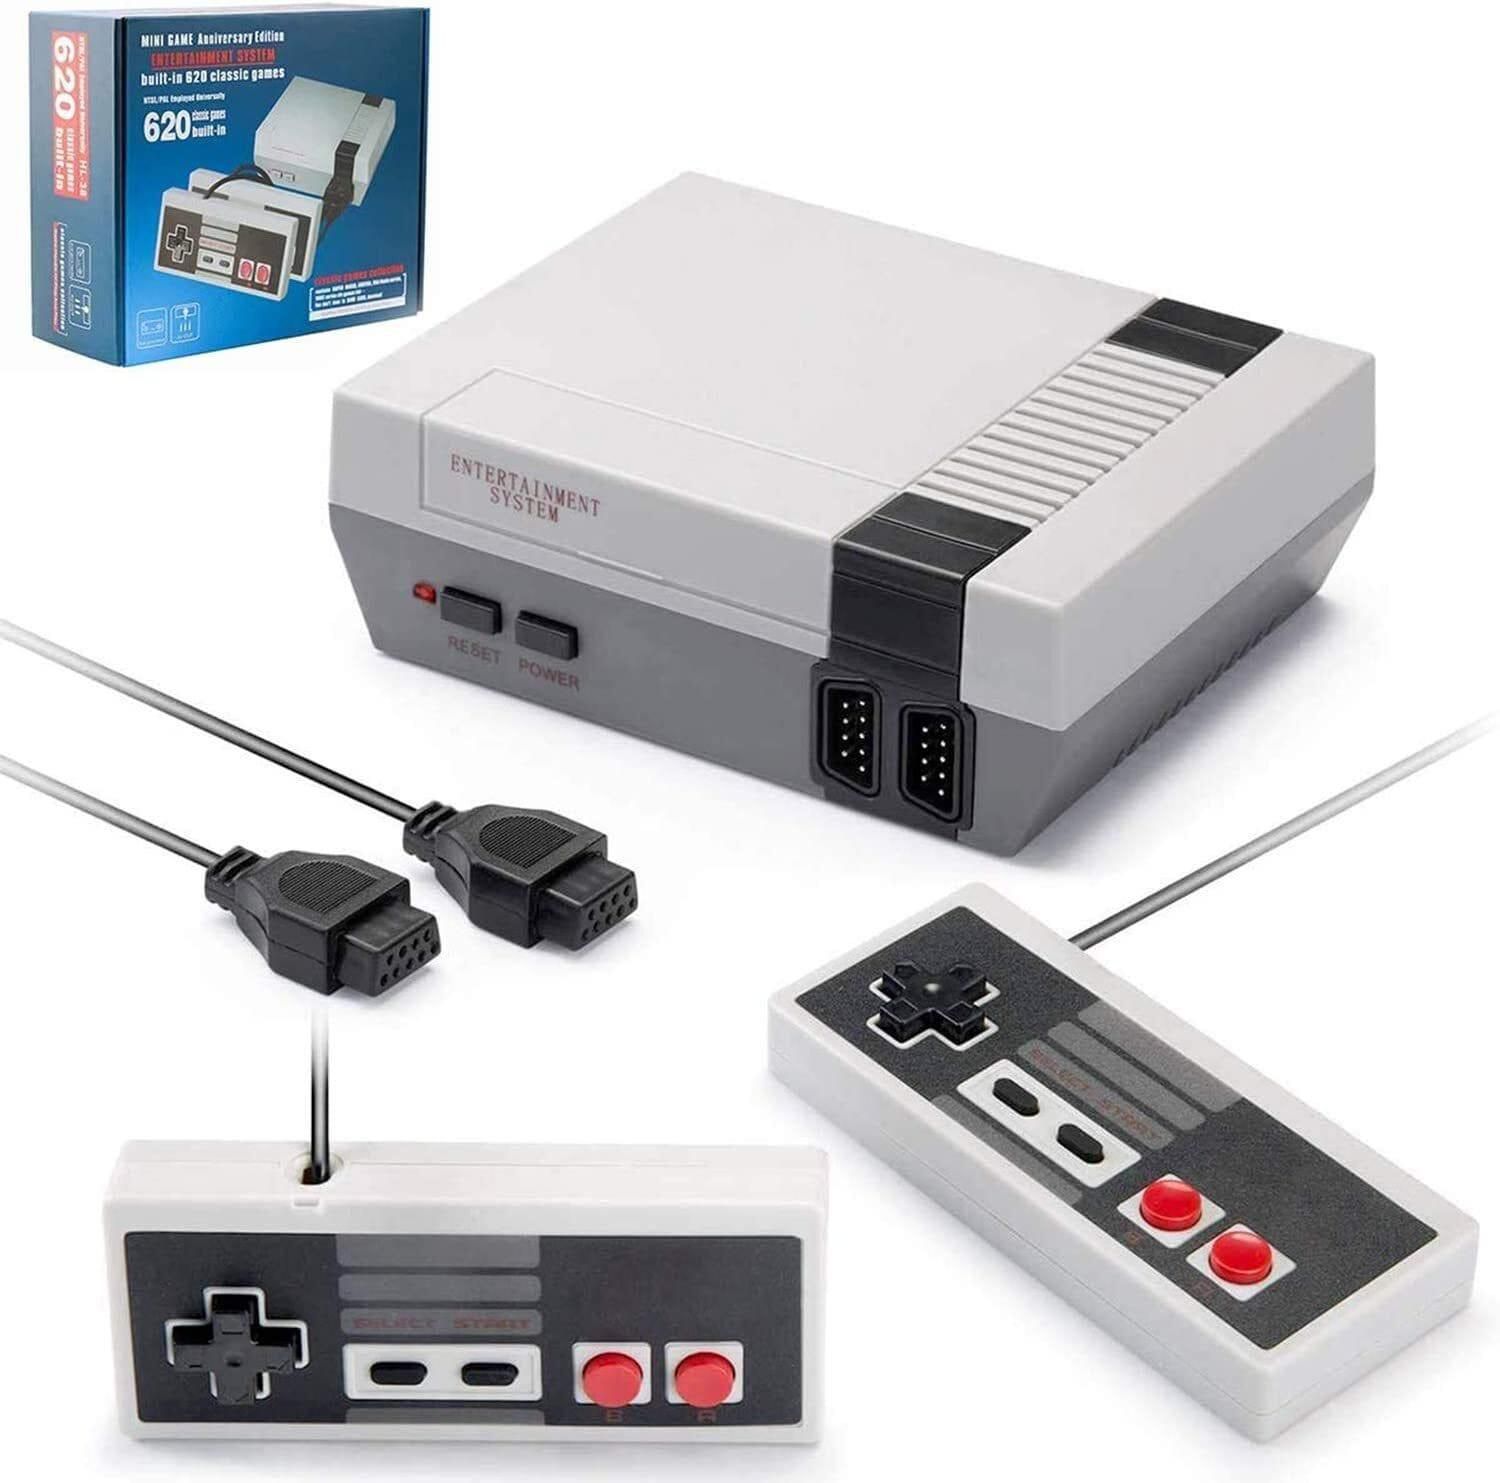 Zeion Classic Retro Game Console Mini Video Game Consoles With 620 Games For Style Nes Game Handdle Gaming - Av Output (Not Oem)